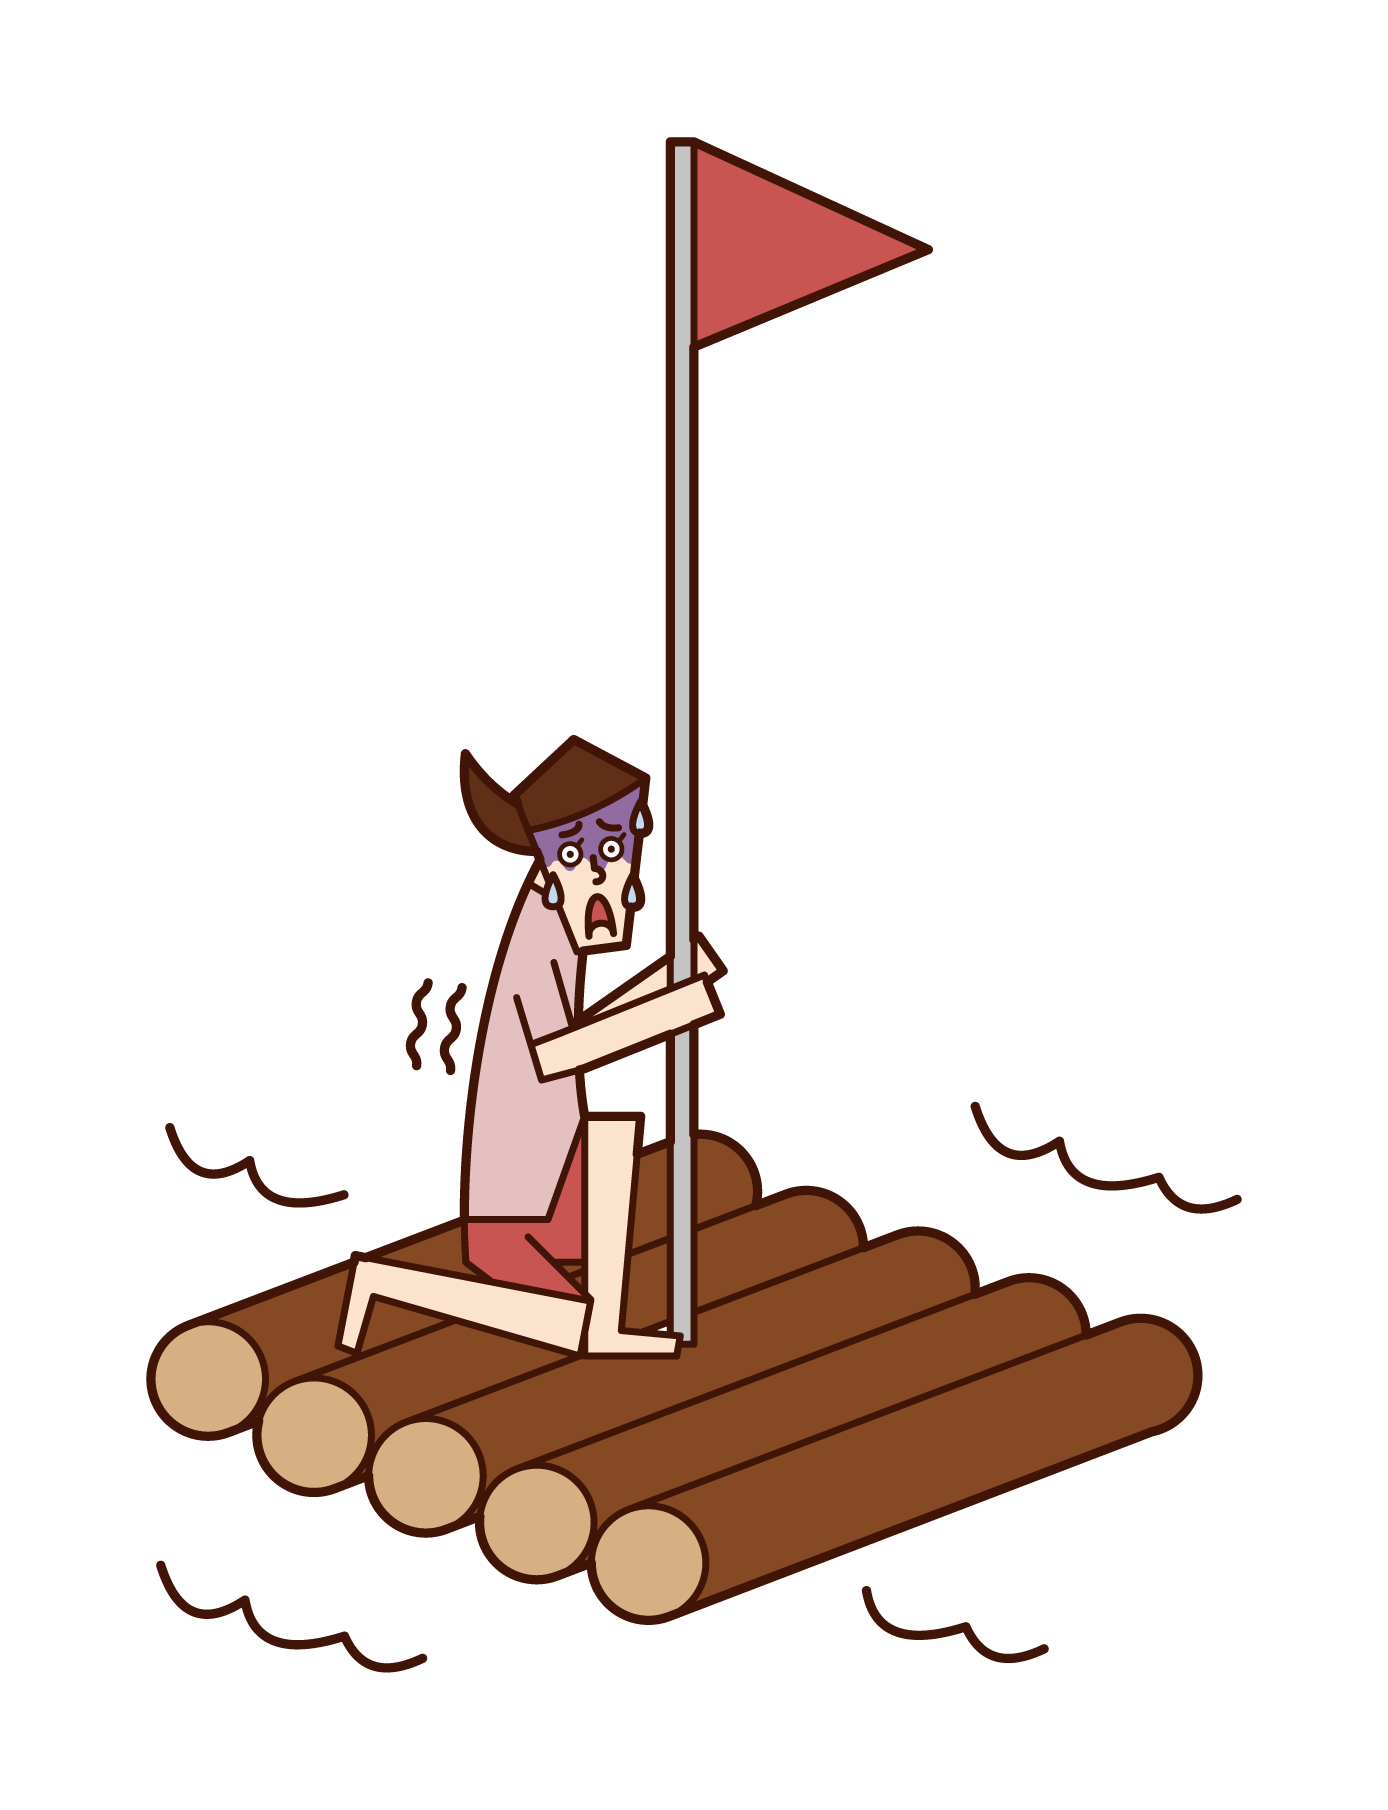 Illustration of a frightened person (woman) on a raft